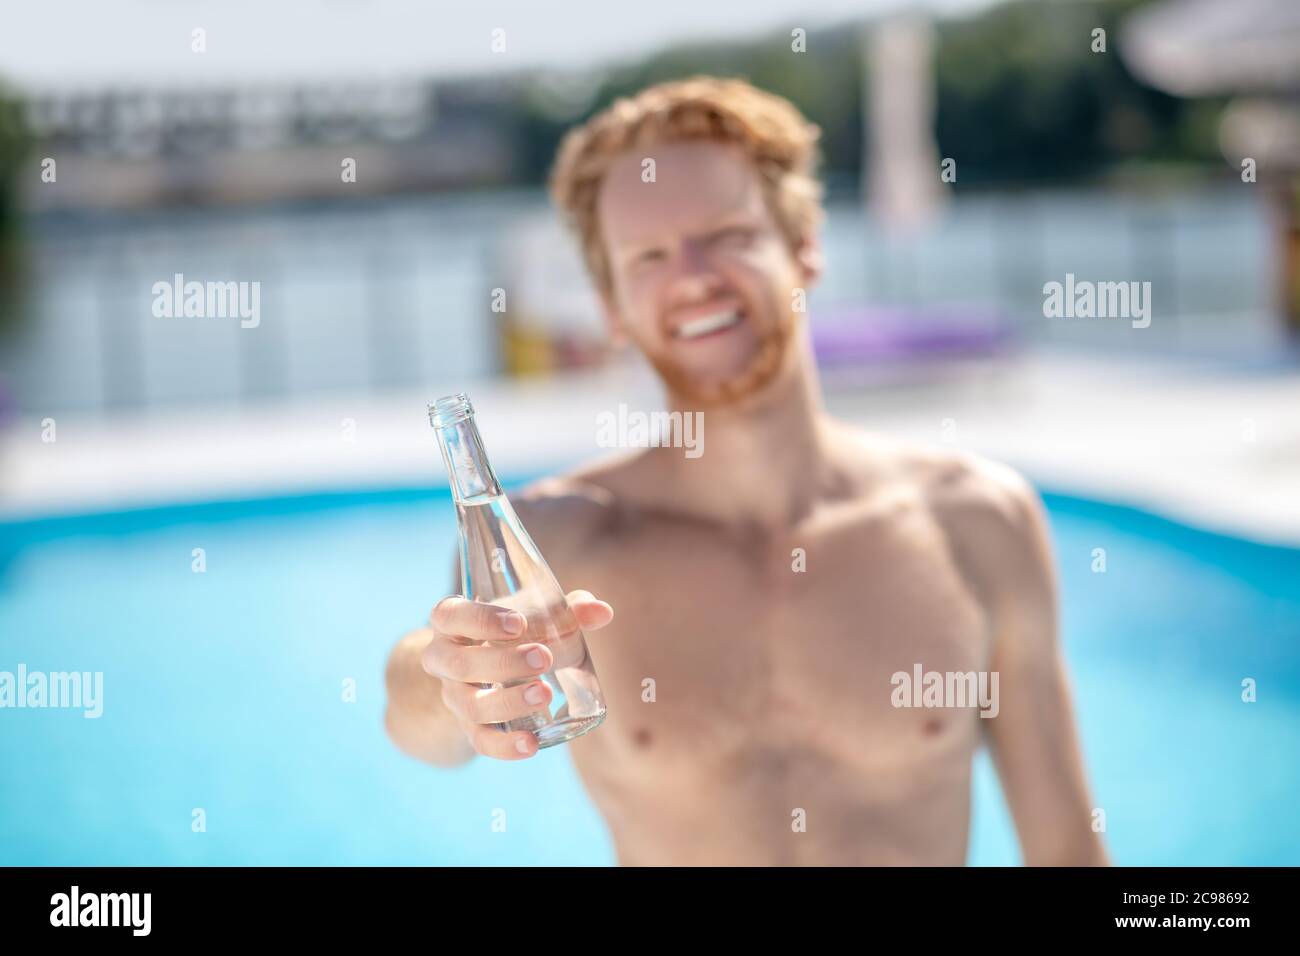 Bottle of drinking water in mans outstretched hand. Stock Photo